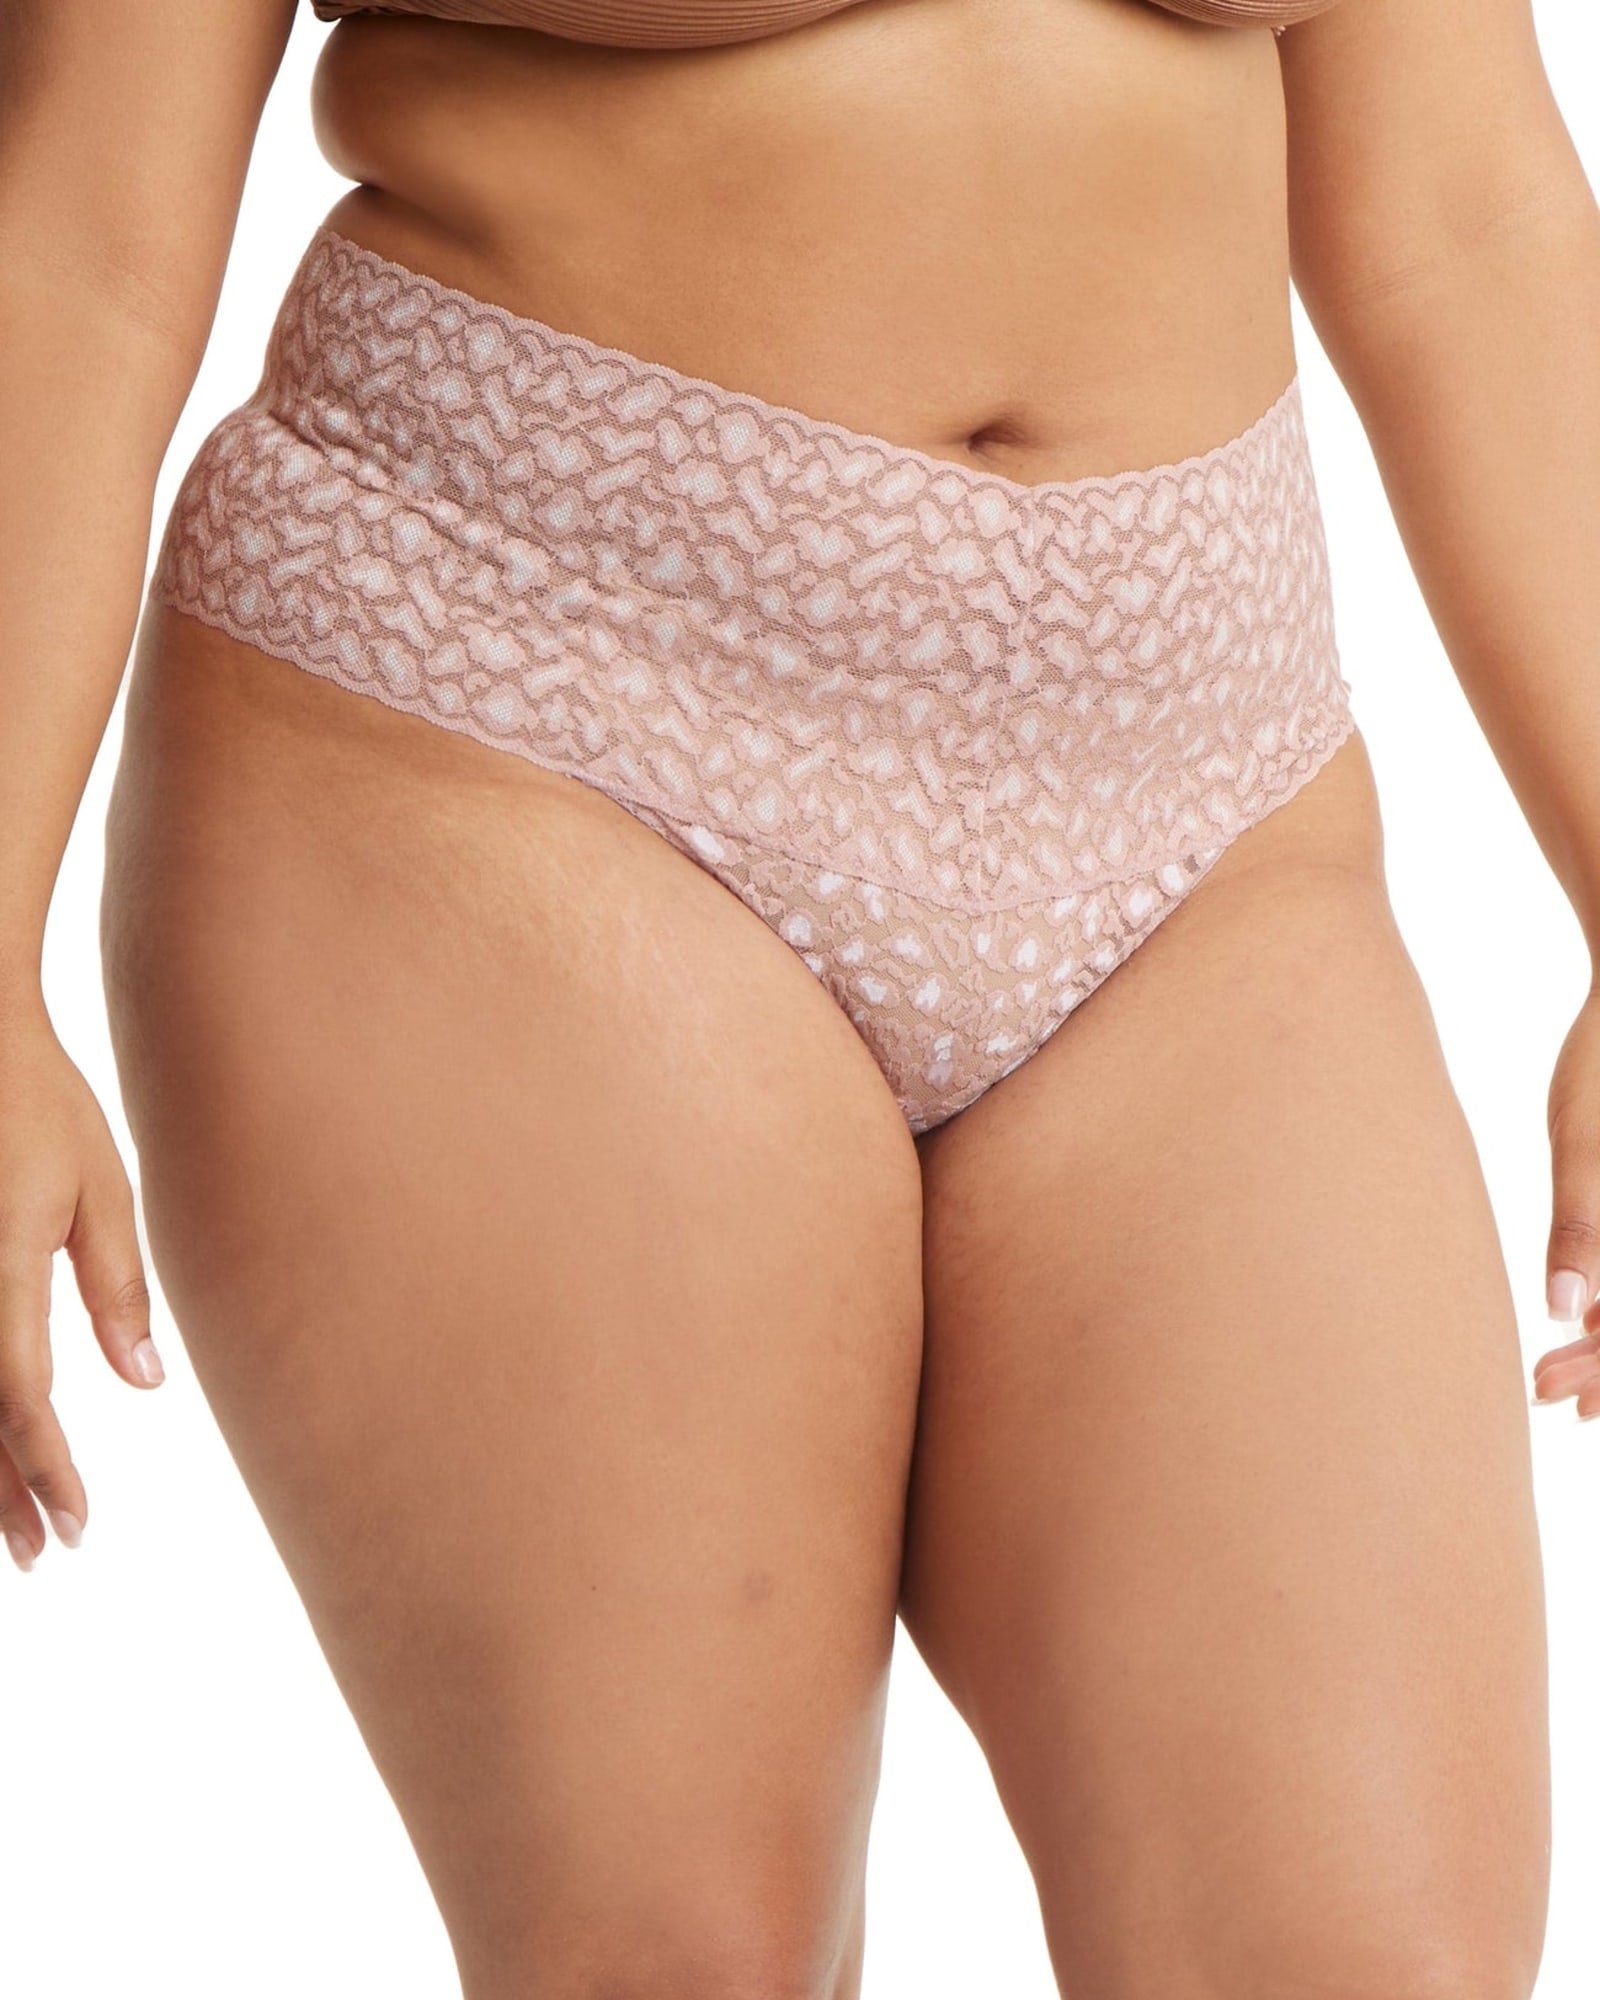 Lace High Waist Cheeky Panty - Serenity blue